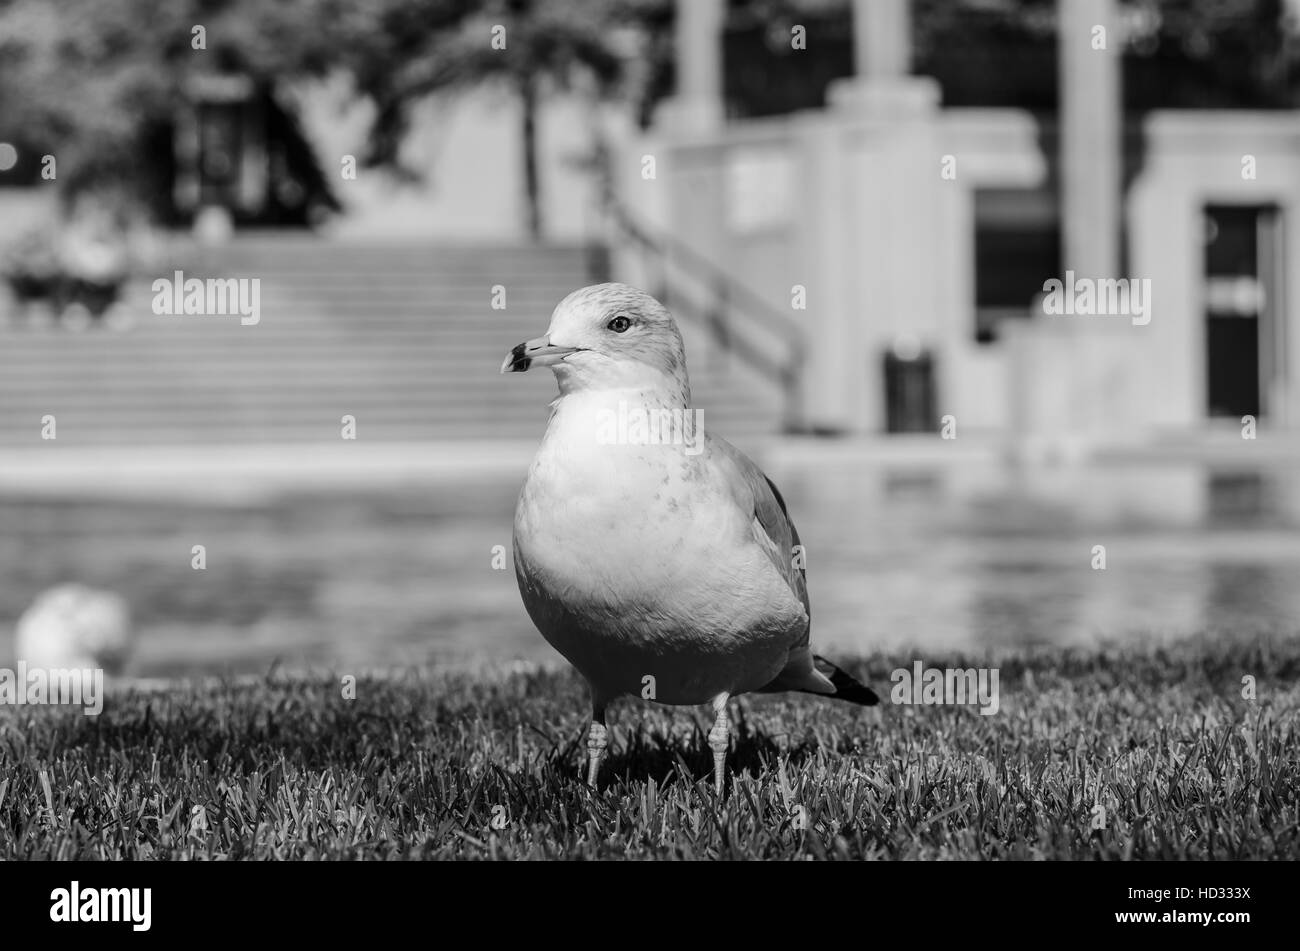 Seagull standing in black and white Stock Photo